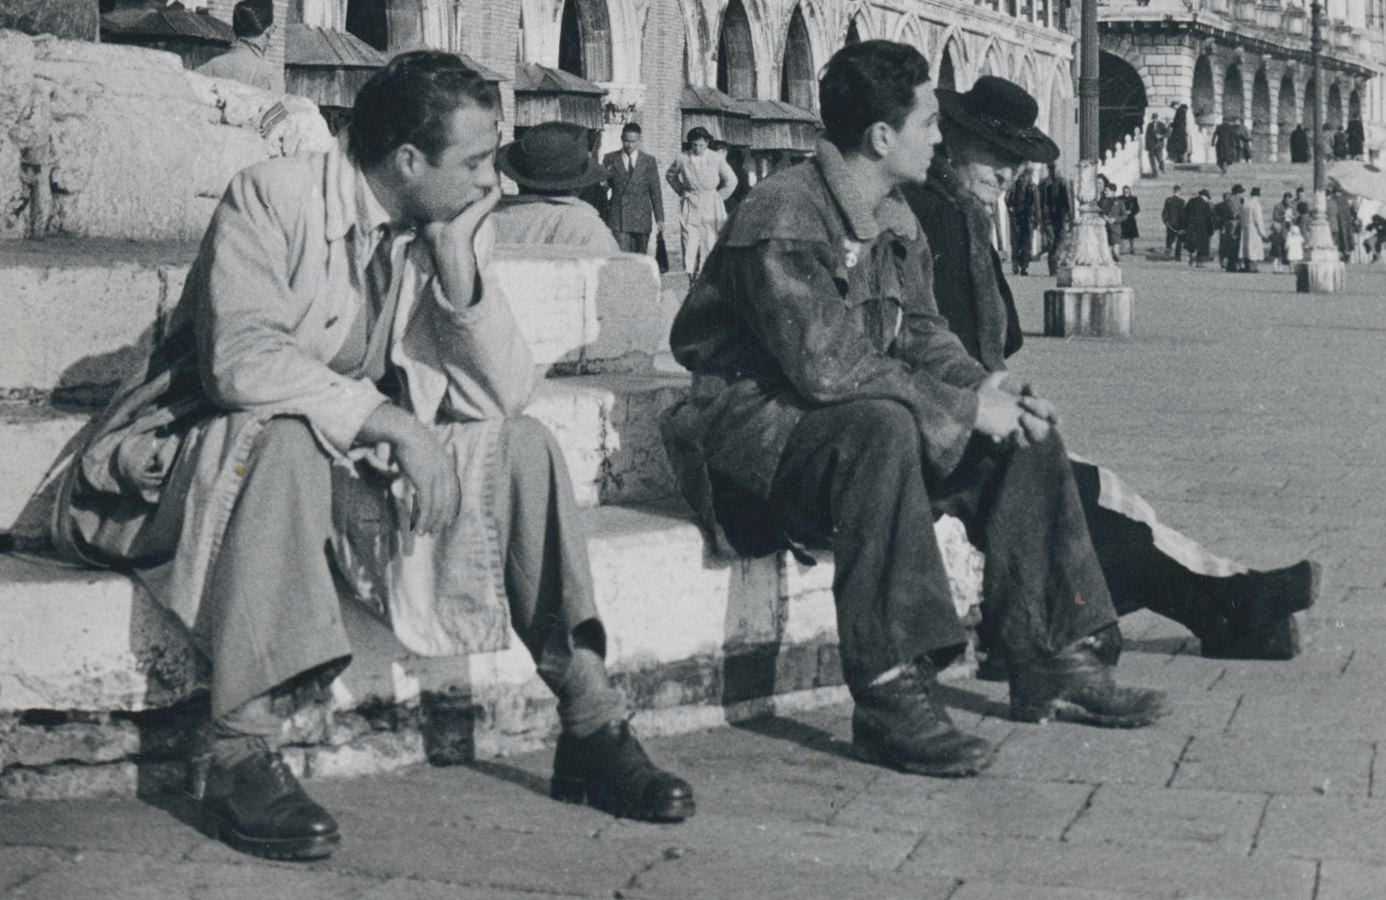 Venice - Men sitting at Markus Square, Italy 1950s, 18, 2 x12, 9 cm - Photograph by Erich Andres